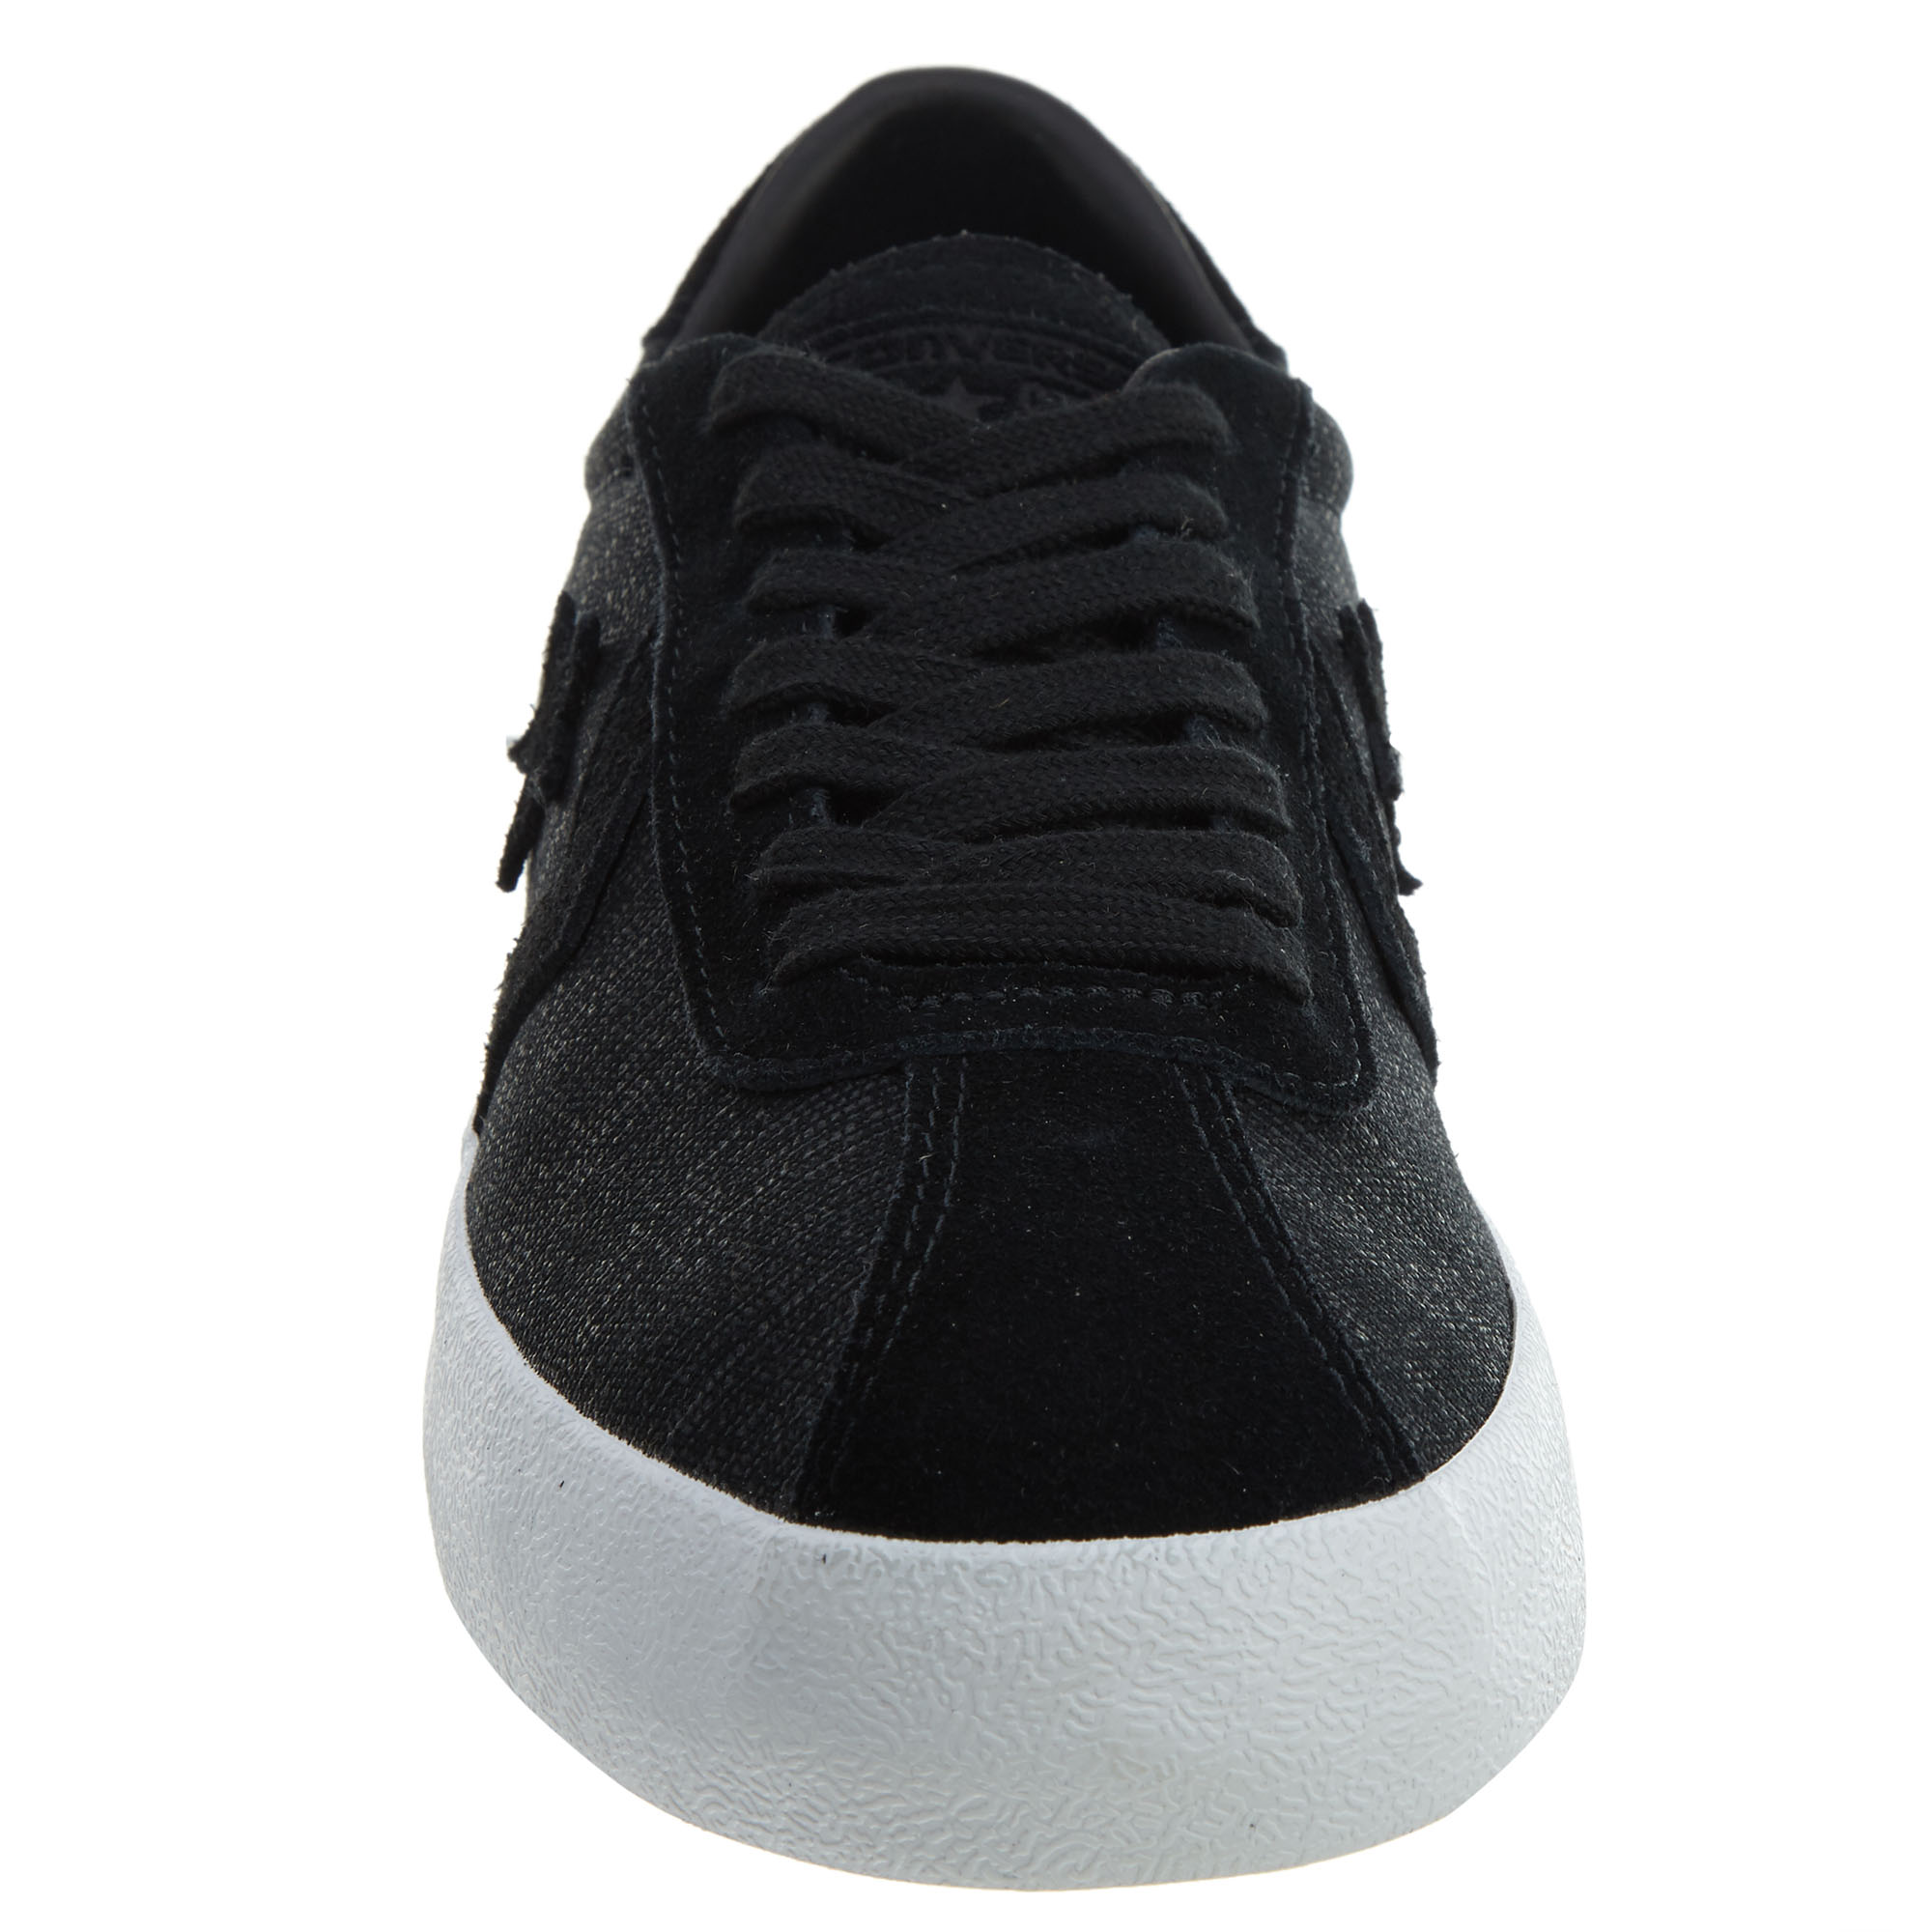 Converse Breakpoint Oxford Unisex Style : 155581c - image 2 of 7